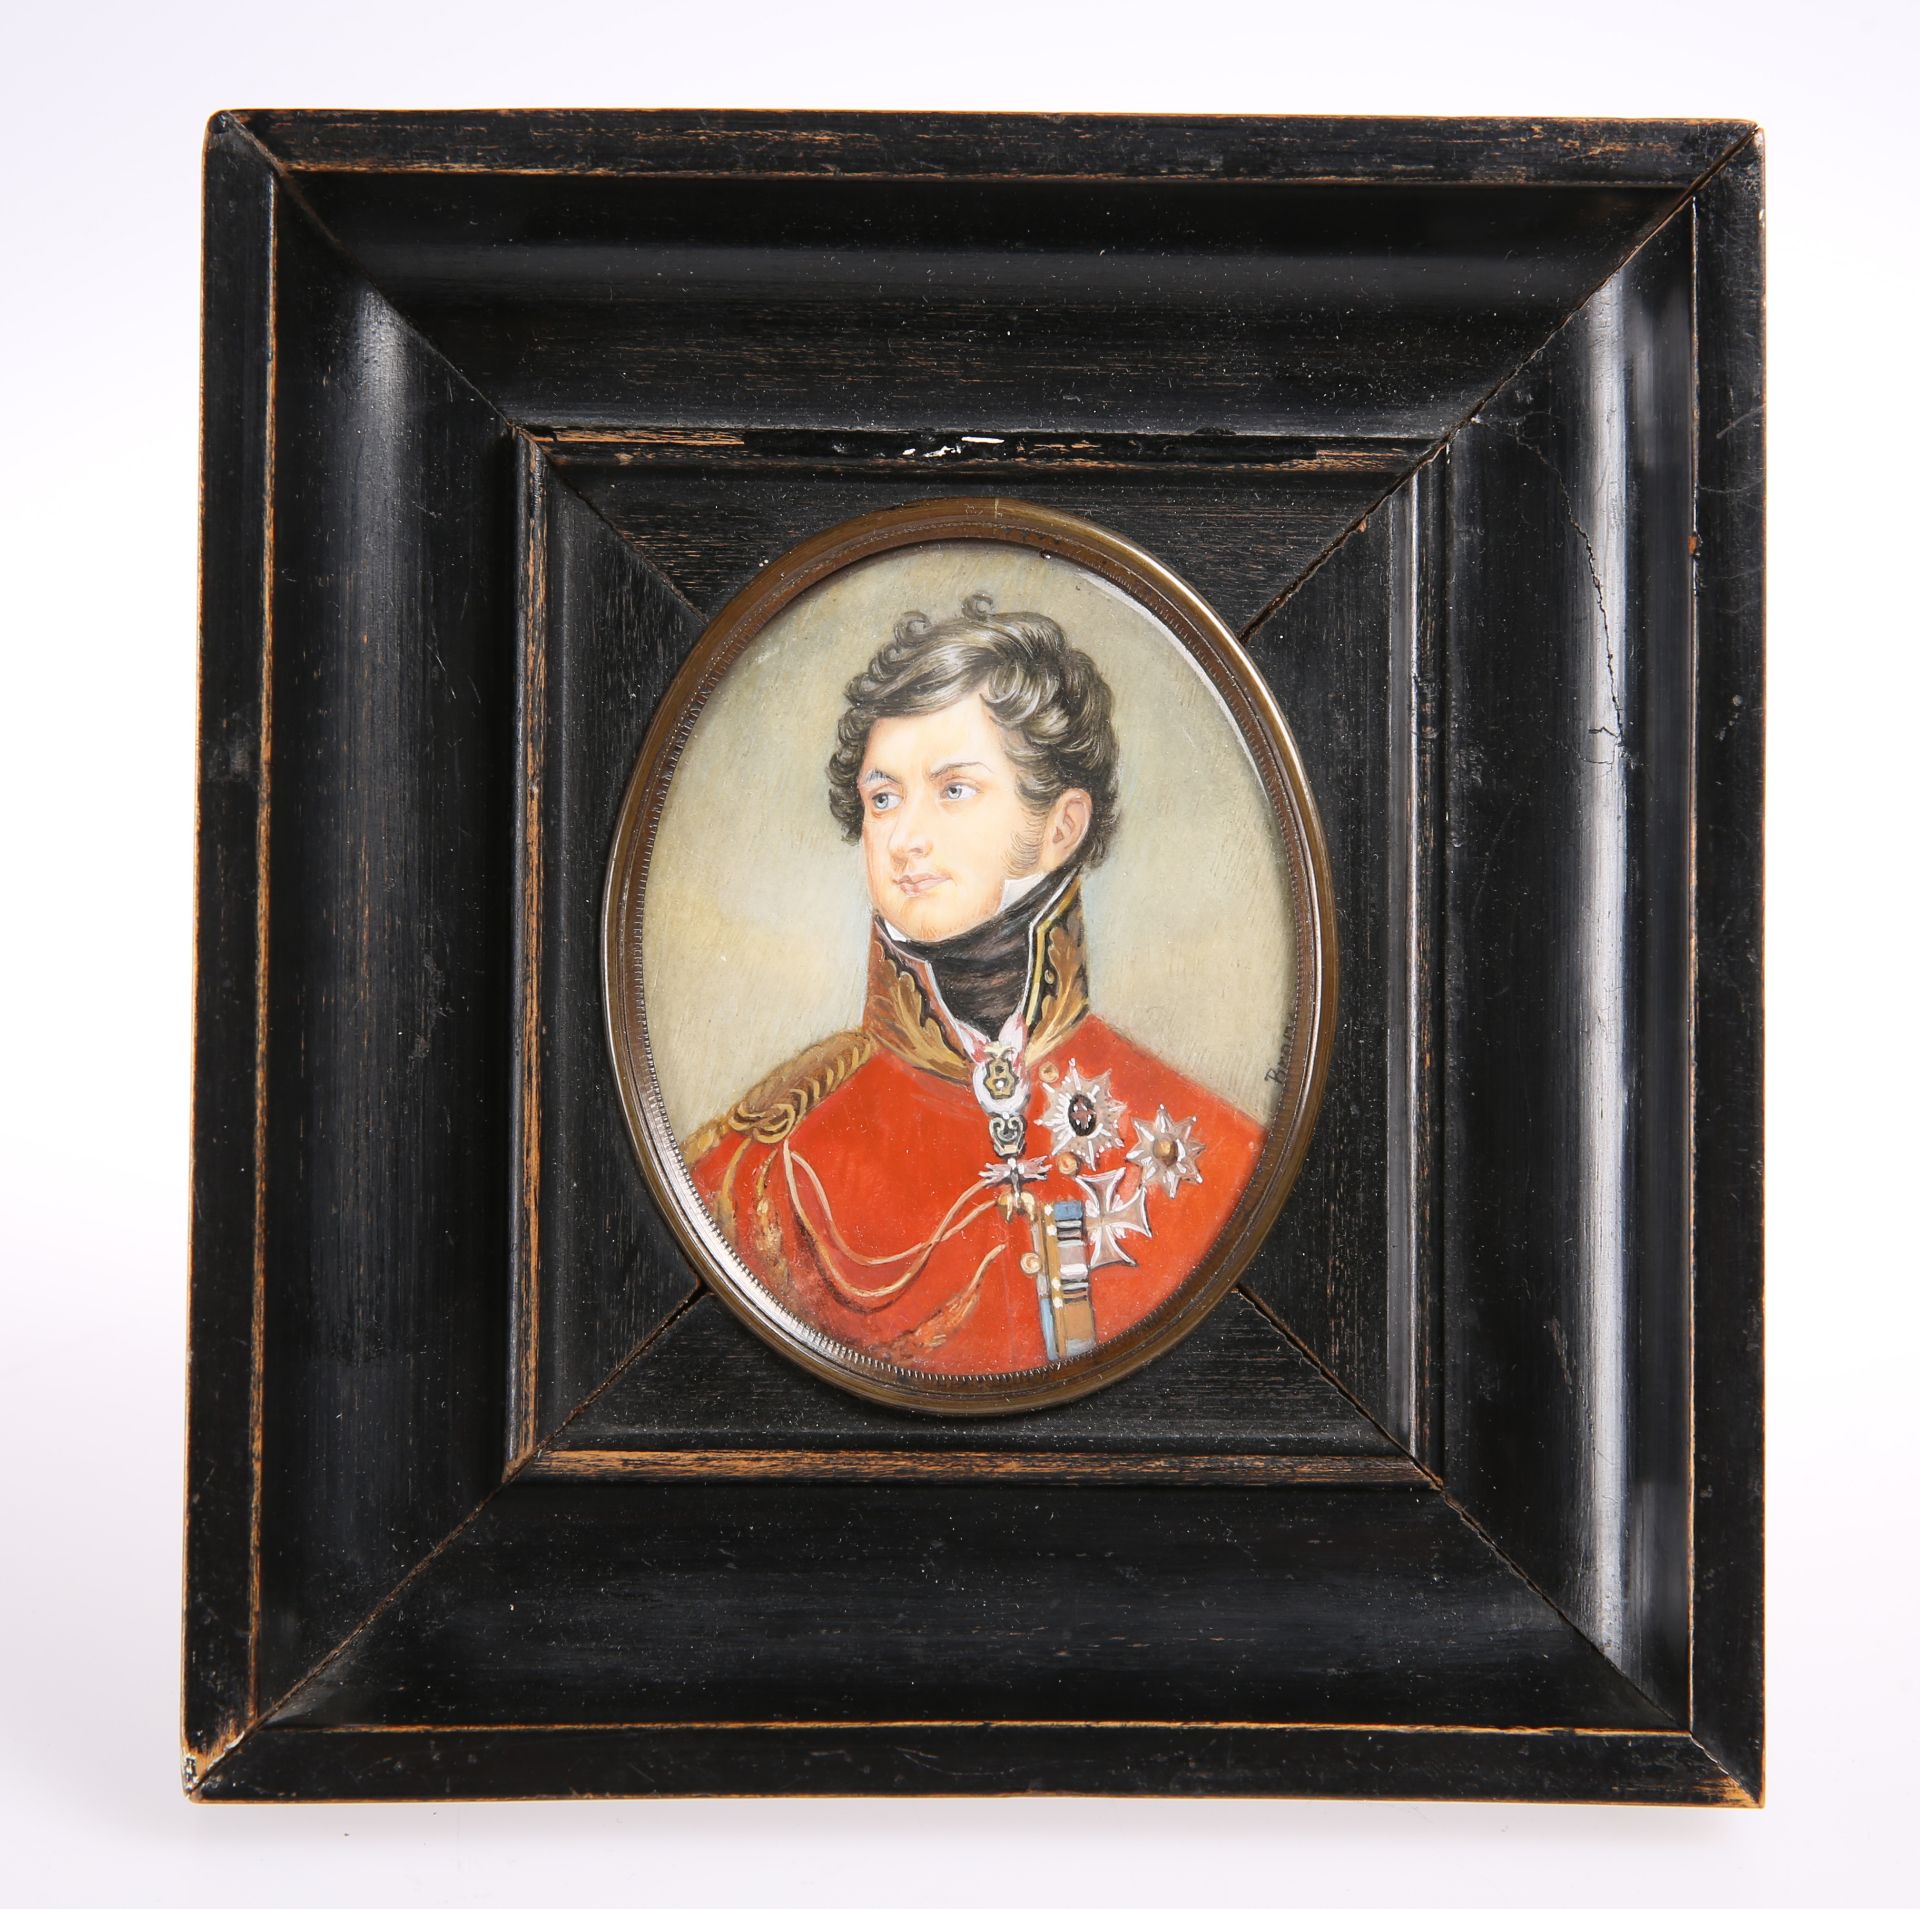 A PORTRAIT MINIATURE OF GEORGE IV, early 20th Century, on ivory, in an ebonised frame, inscribed